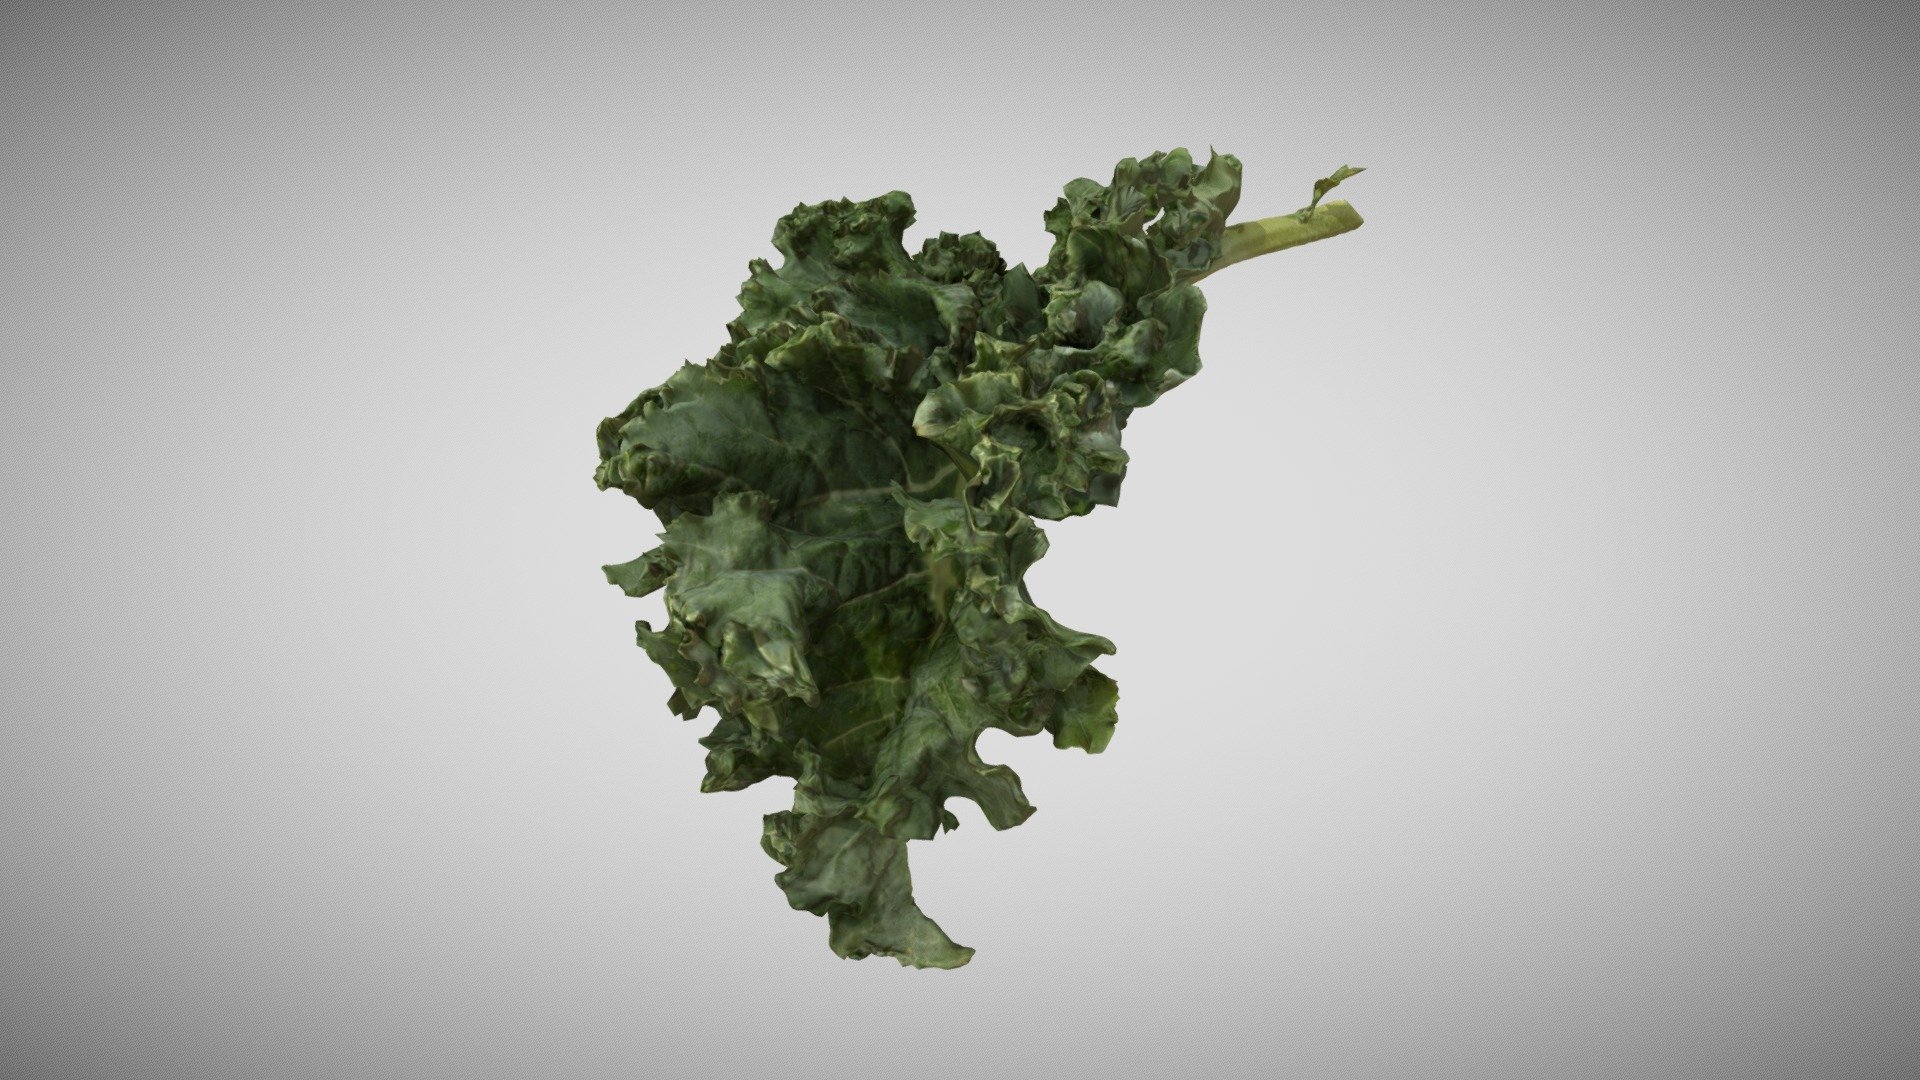 Kale 3D Scan captured with Canon 5DSR with Macro Lens, using cross-polarization lighting for flat light and elimination of highlights, which captures a more true color and more points for the point cloud, which is then surfaced to a mesh. Package includes low and high poly OBJs (5,519 polys and 88,256 polys), diffuse map (4k), normal map (4k), glossy map (2k), specular map (2k), and mtl files (so you can drag-and-drop to view obj with texture). The models have quad meshes with UVs 3d model